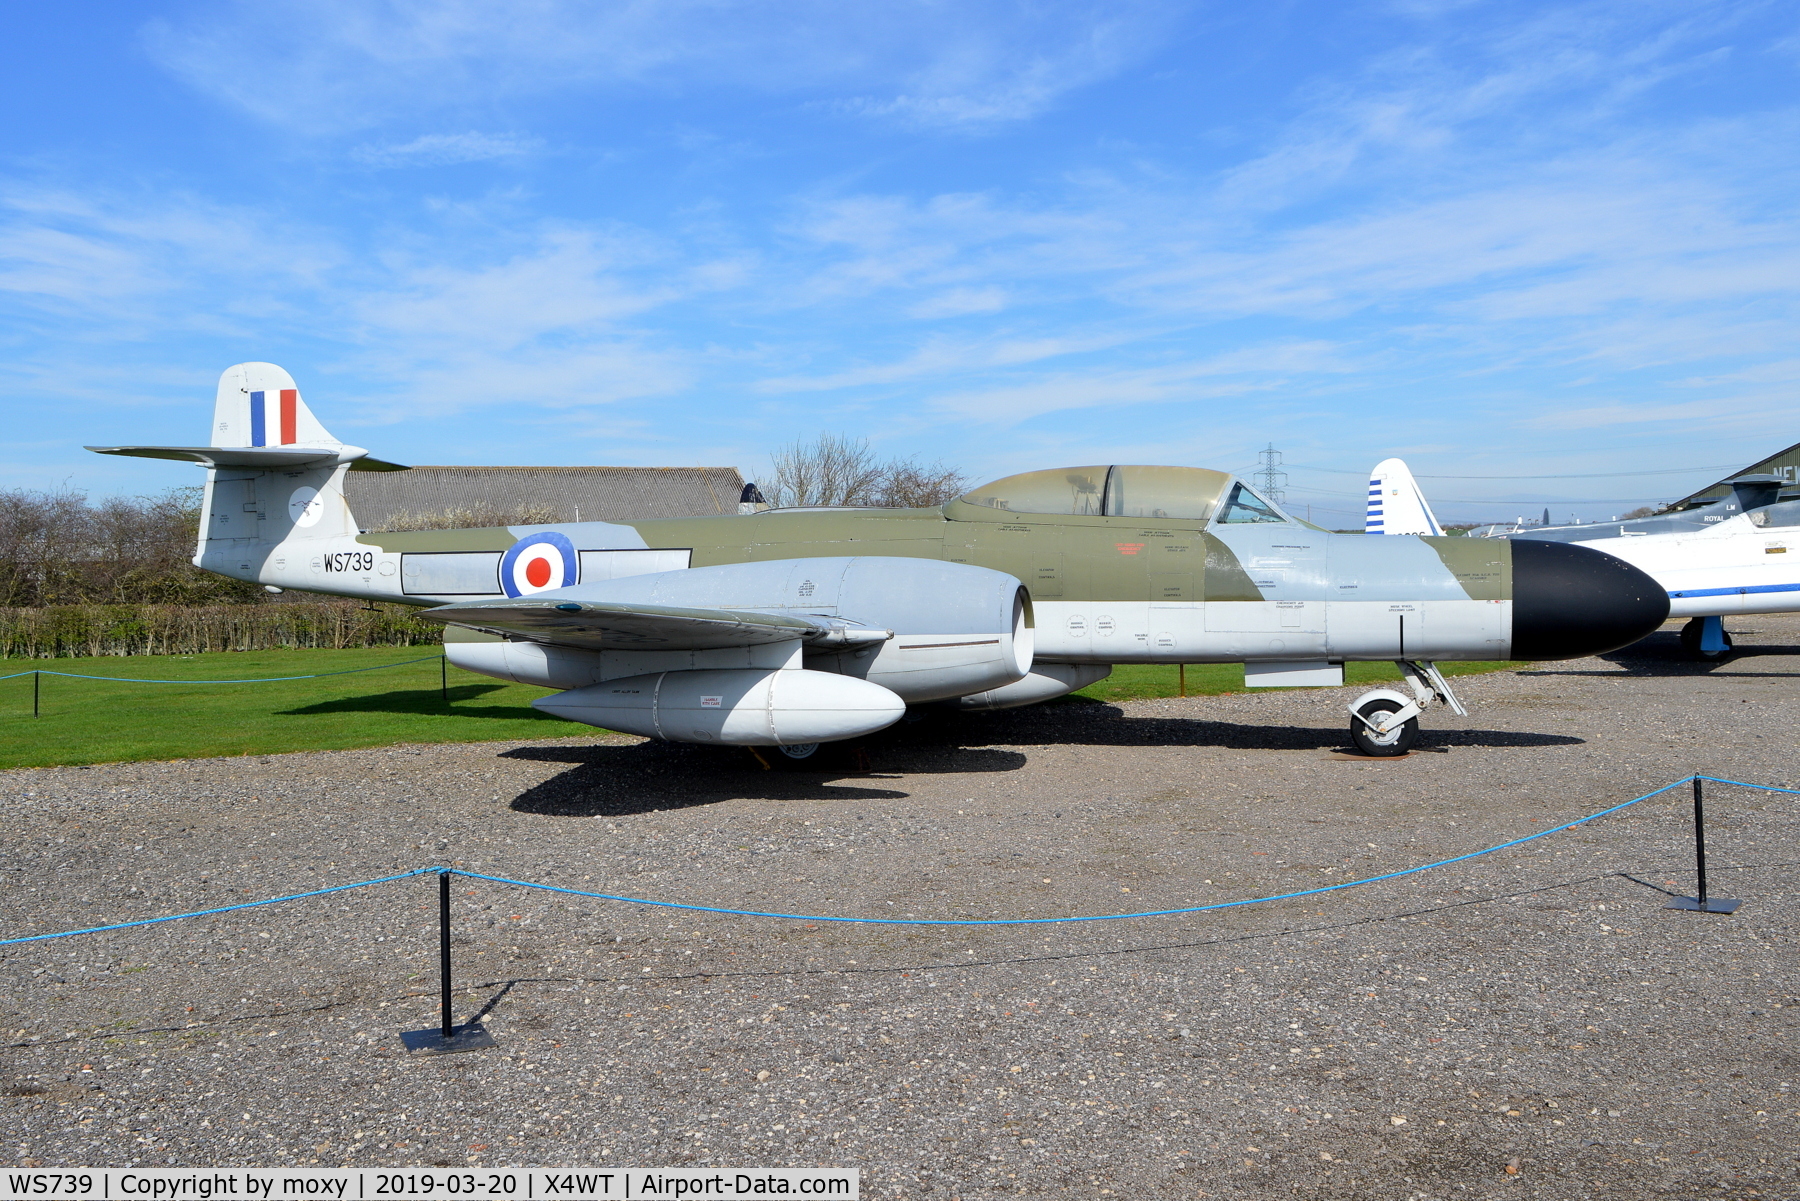 WS739, Gloster Meteor NF(T).14 C/N Not found WS739, Gloster Meteor NF(T).14 at Winthorpe.